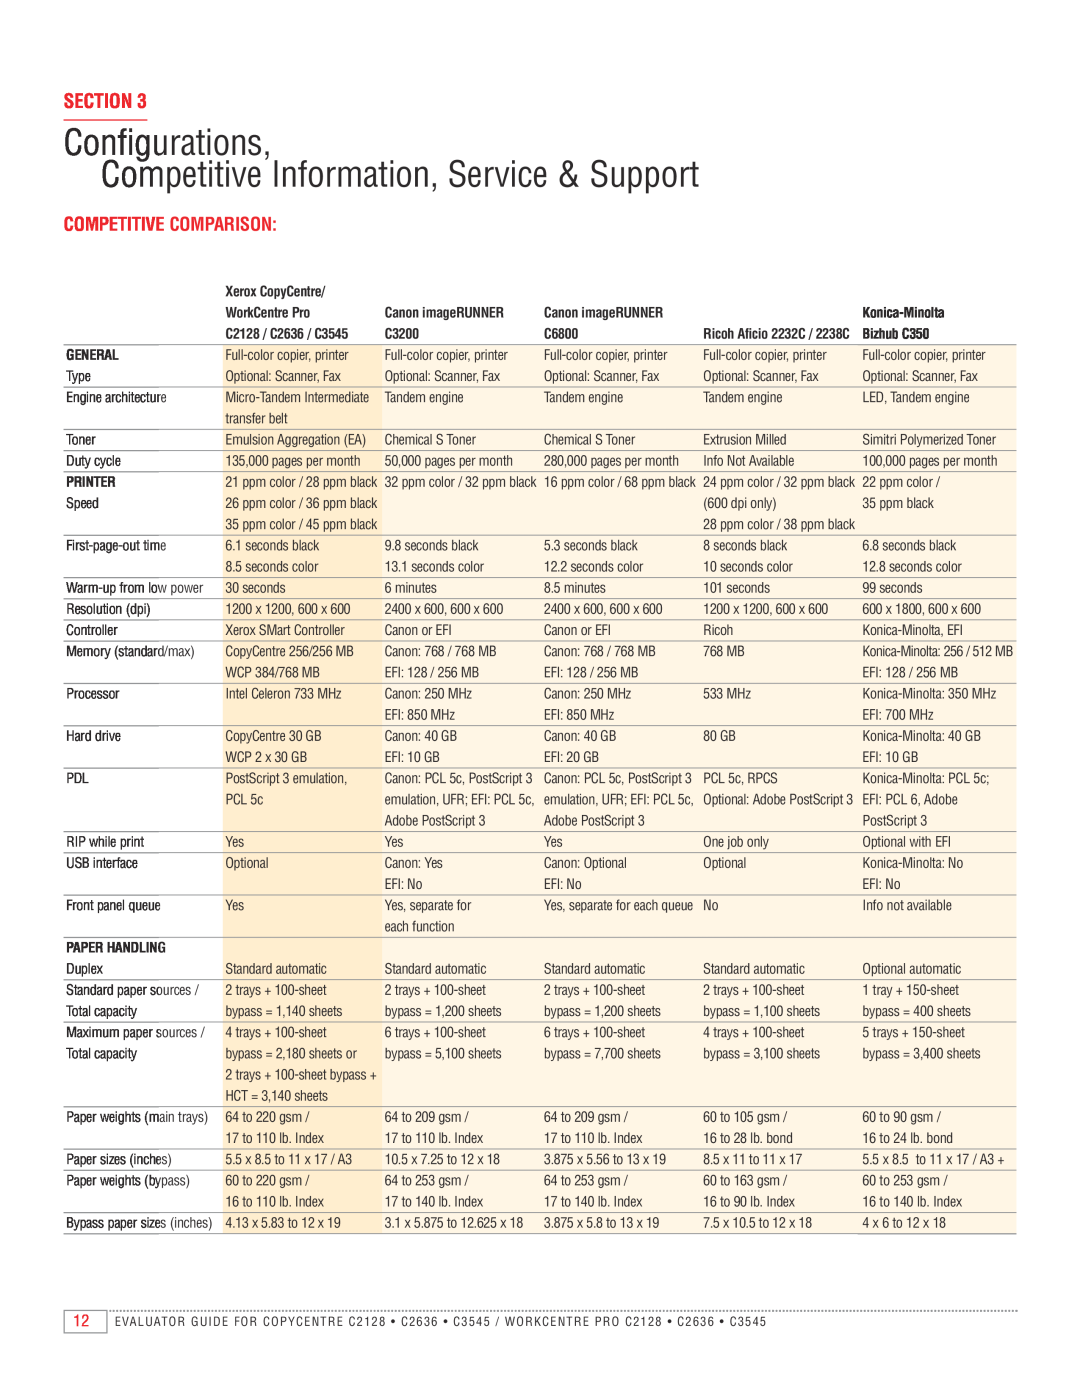 Xerox C2636, C3545, C2128 manual Configurations Competitive Information, Service & Support, Competitive Comparison, Section 